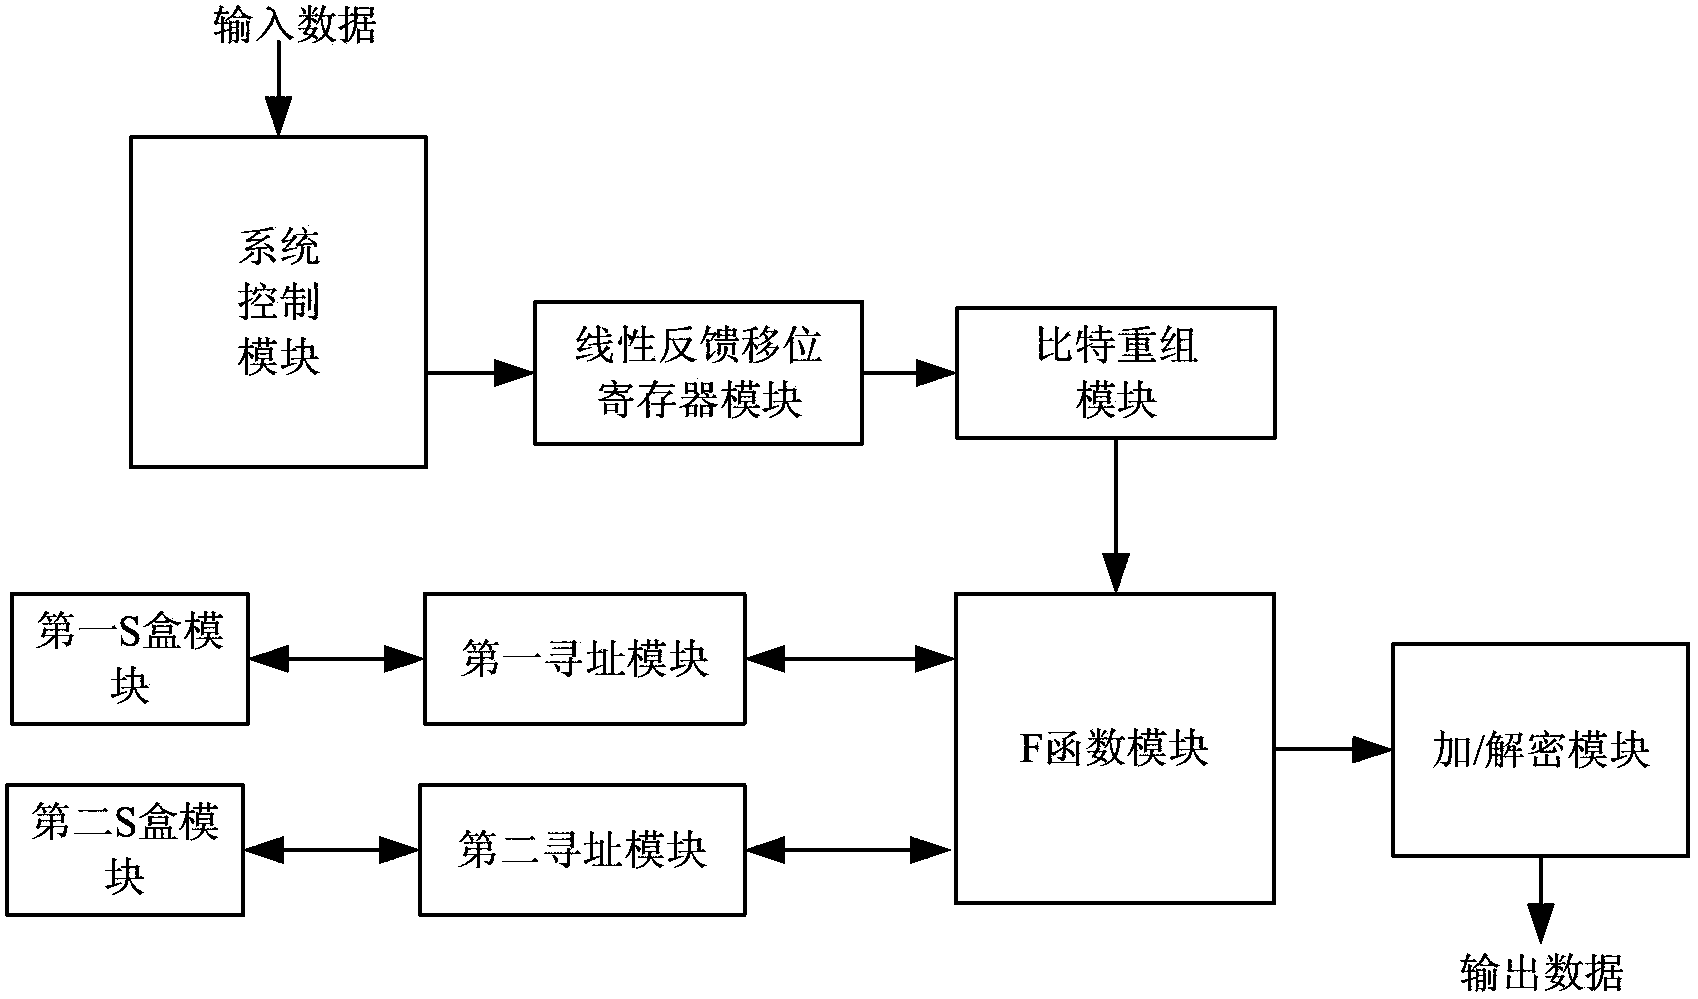 System and method for achieving ZUC